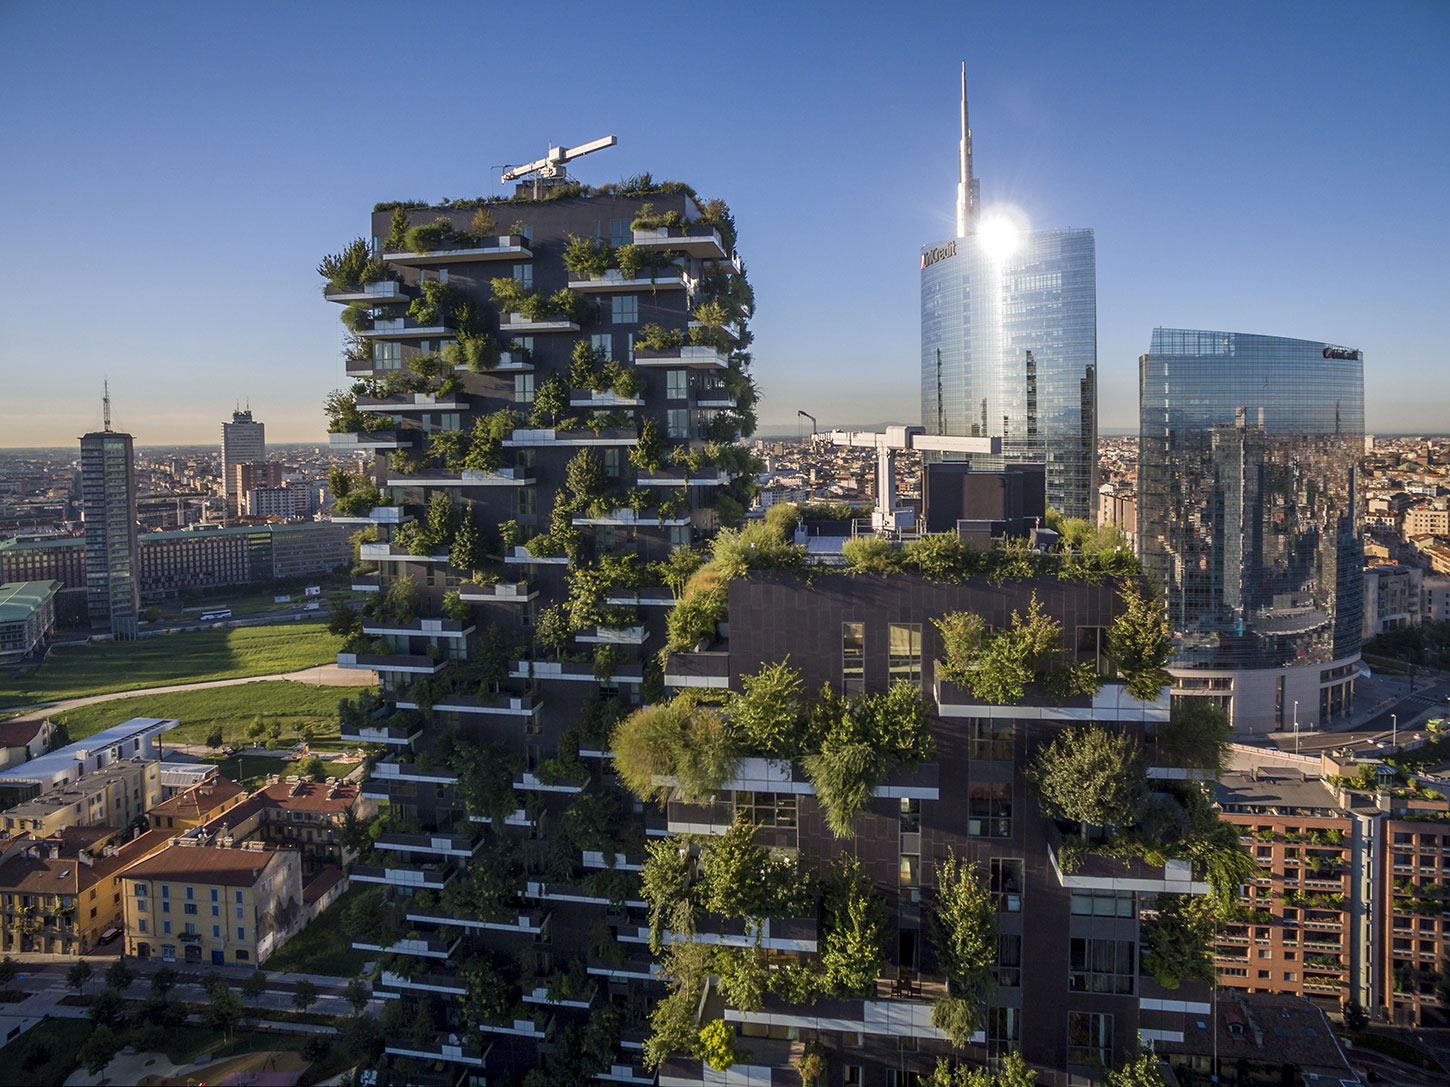 Bosco Verticale (Vertical Forest), Milan Featured Image